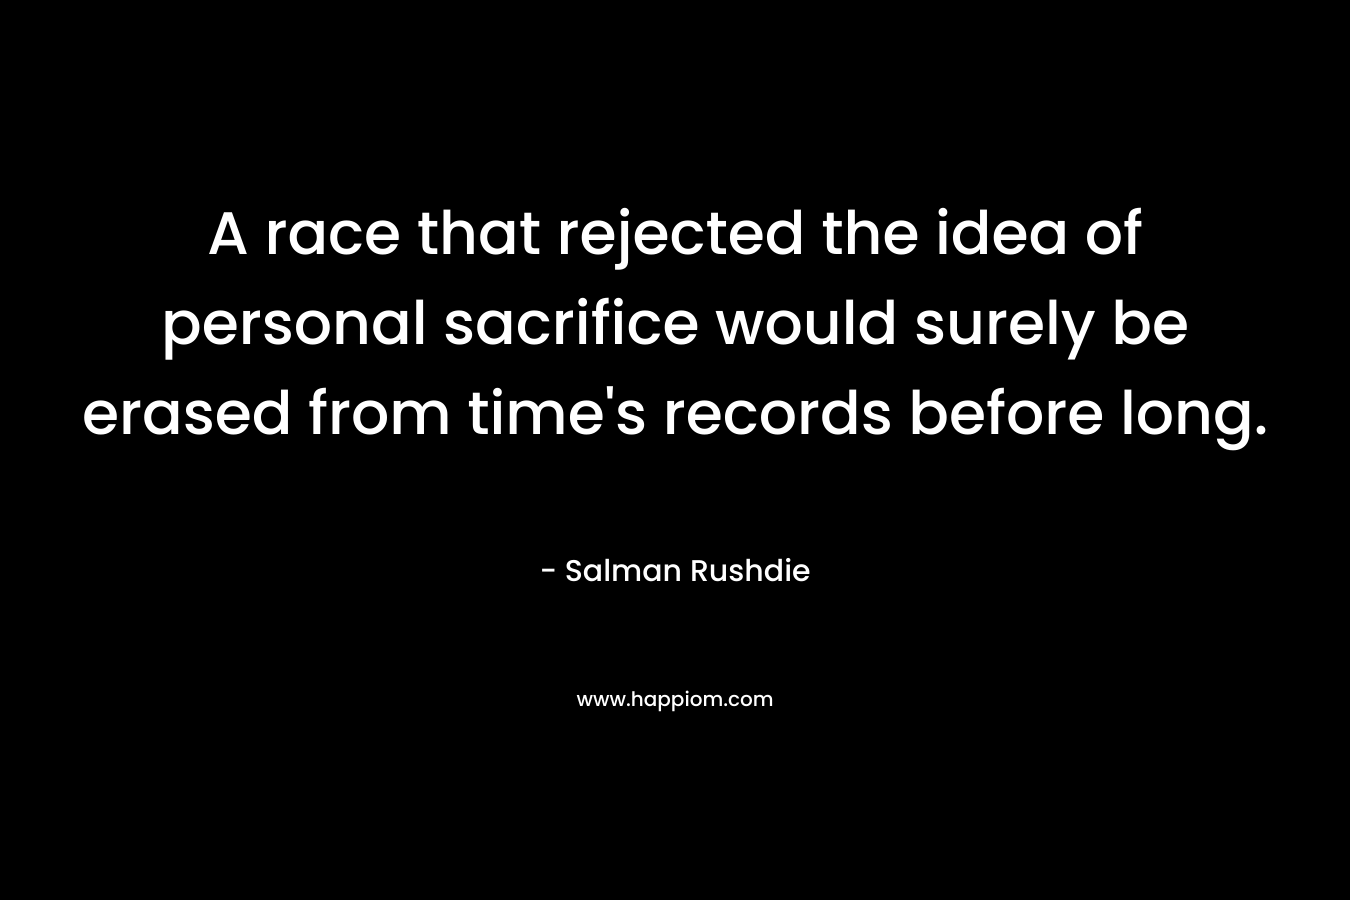 A race that rejected the idea of personal sacrifice would surely be erased from time’s records before long. – Salman Rushdie